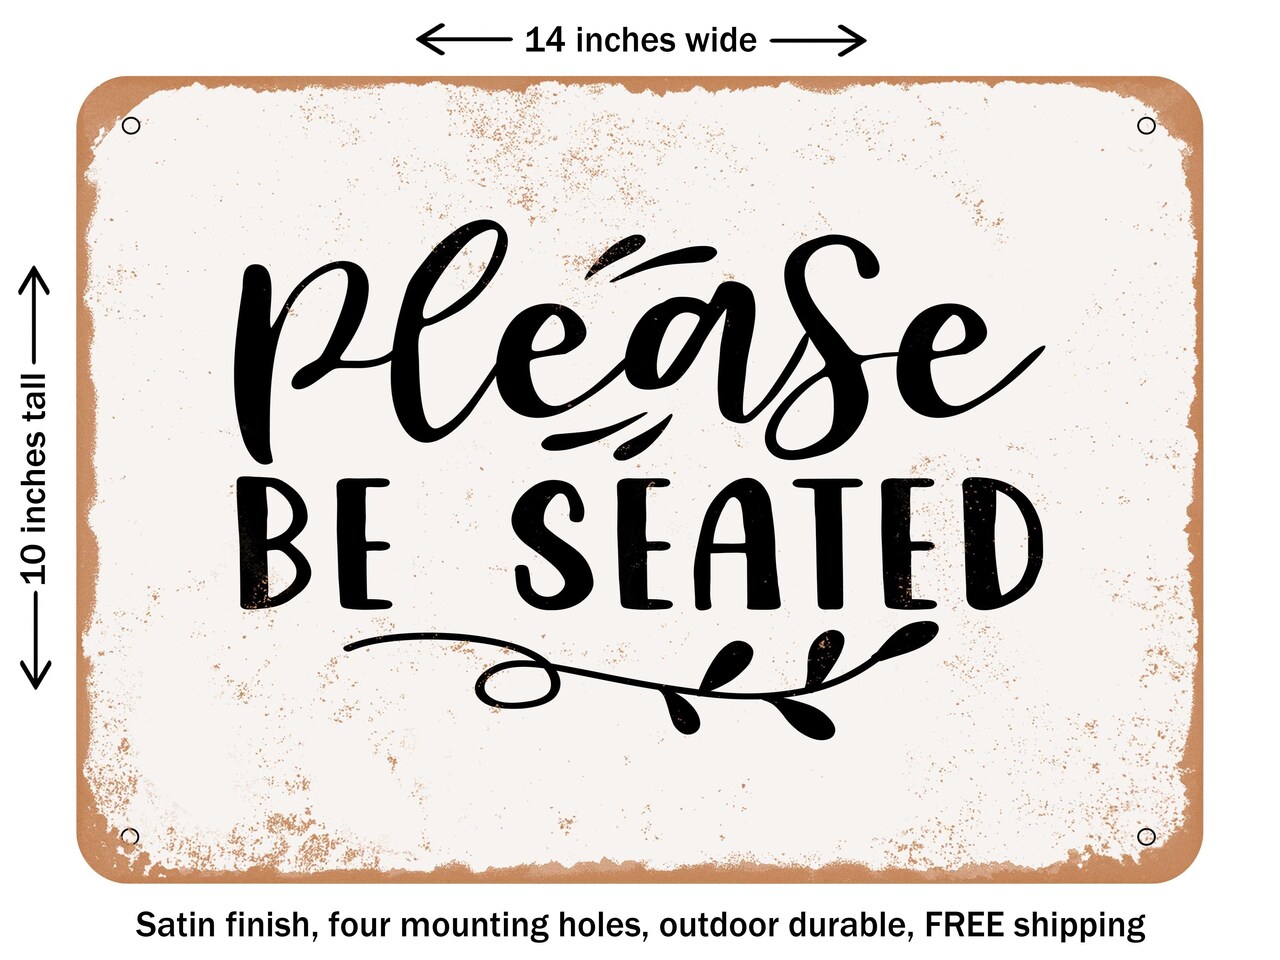 DECORATIVE METAL SIGN - Please Be Seated - Vintage Rusty Look